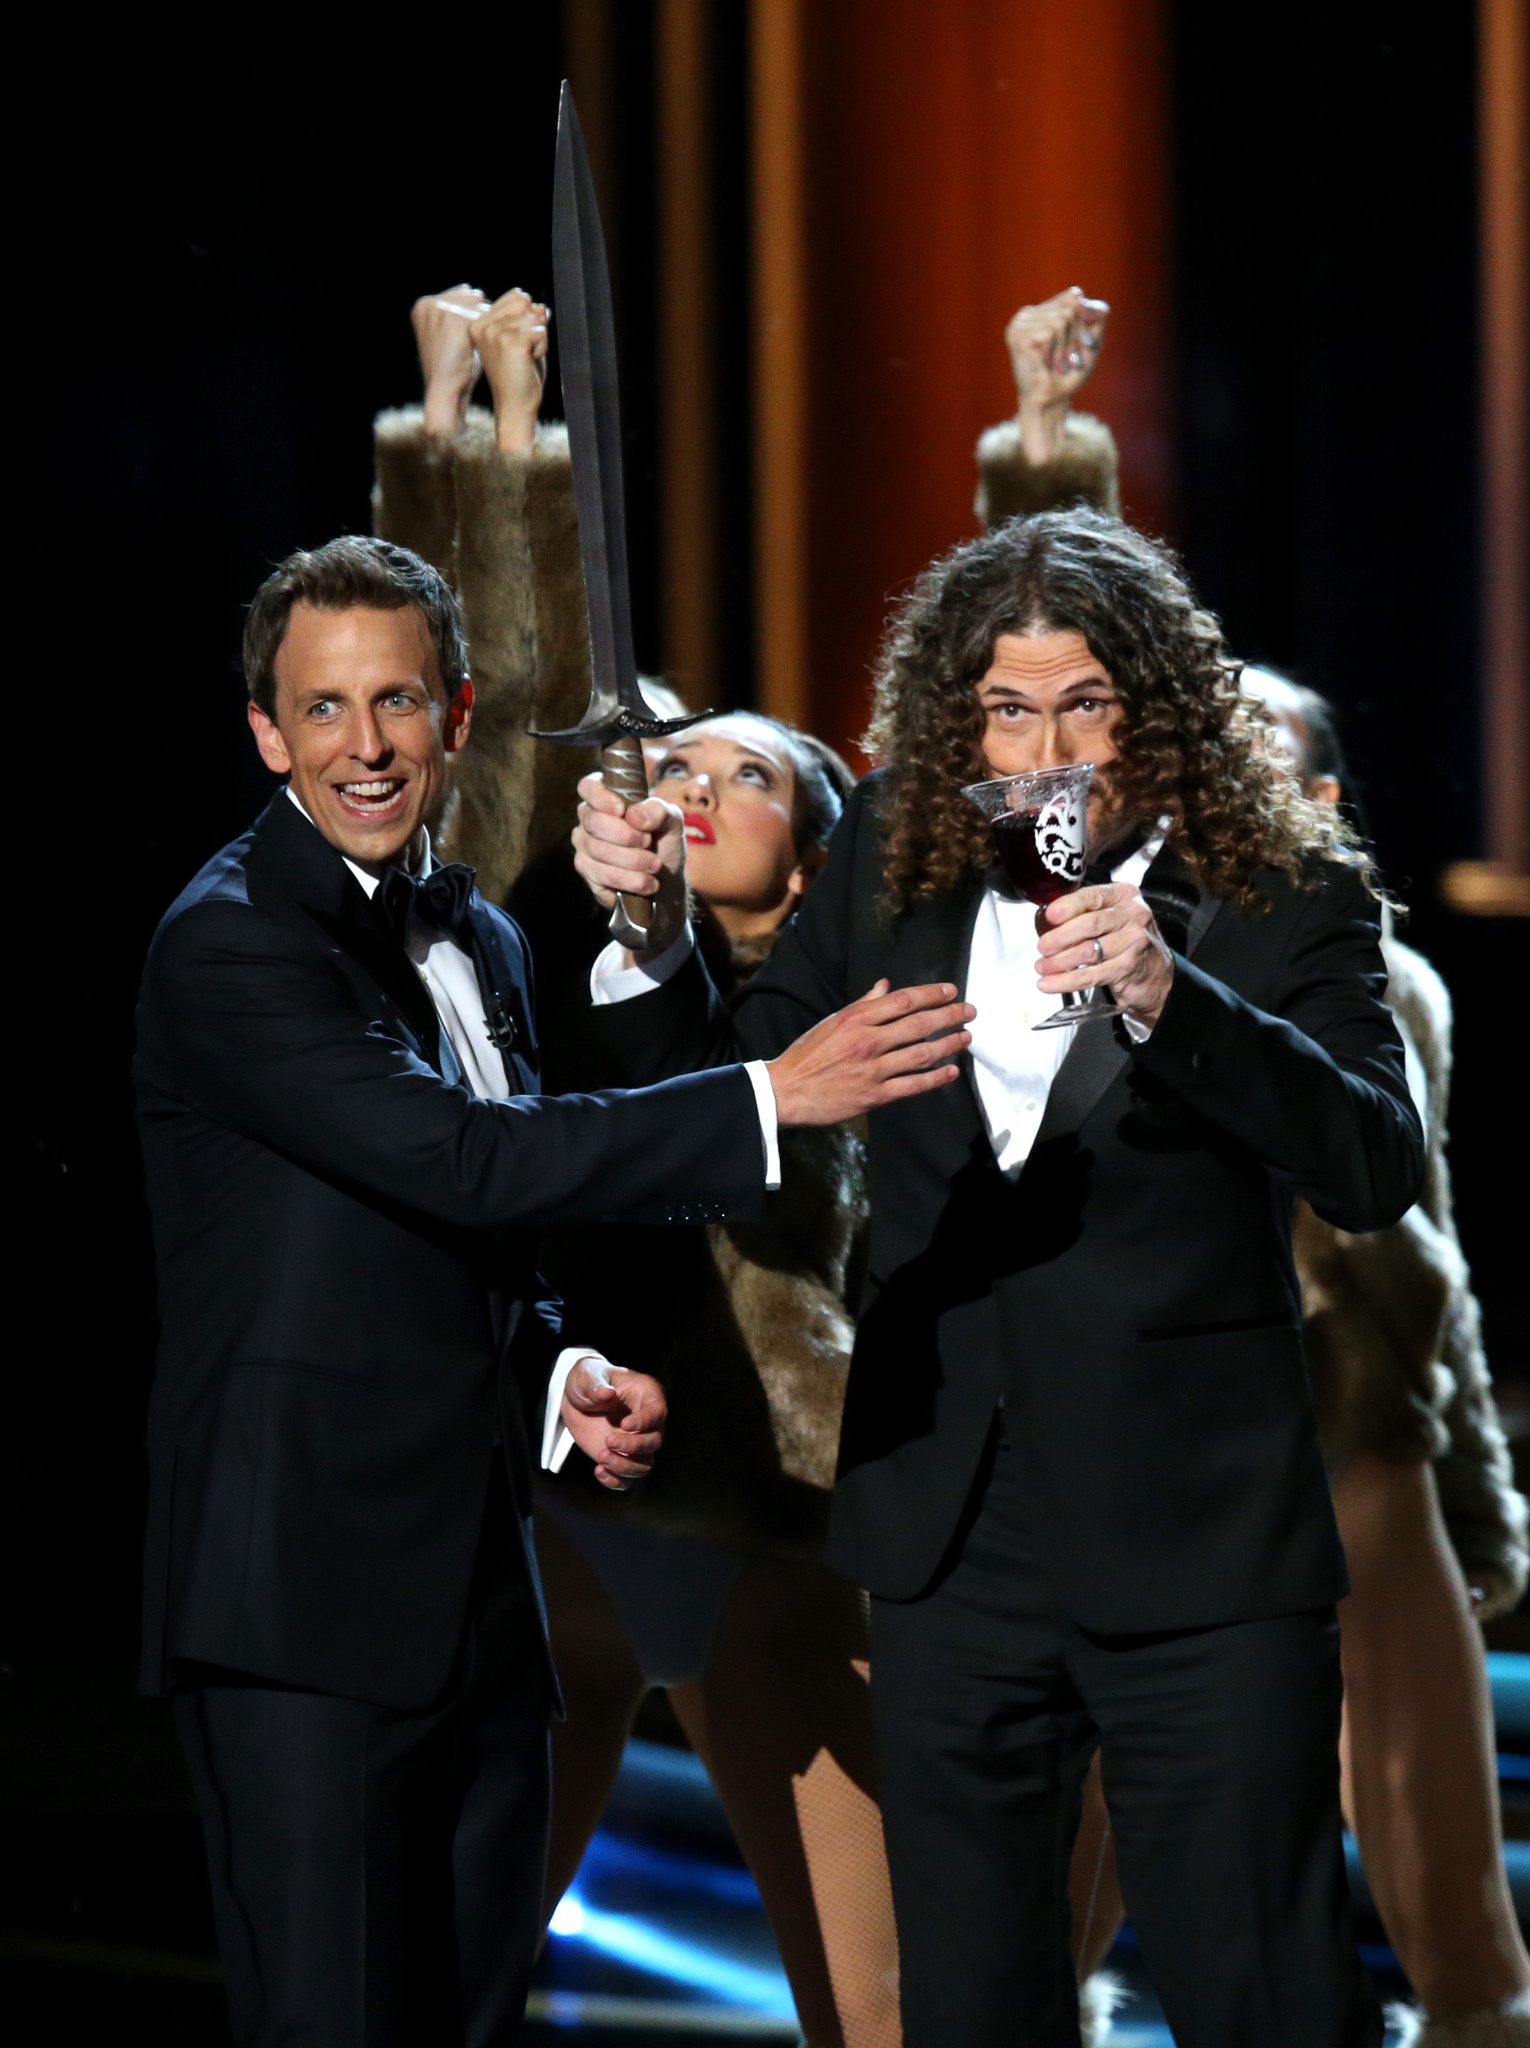 'Weird Al' Yankovic and Seth Meyers at event of The 66th Primetime Emmy Awards (2014)